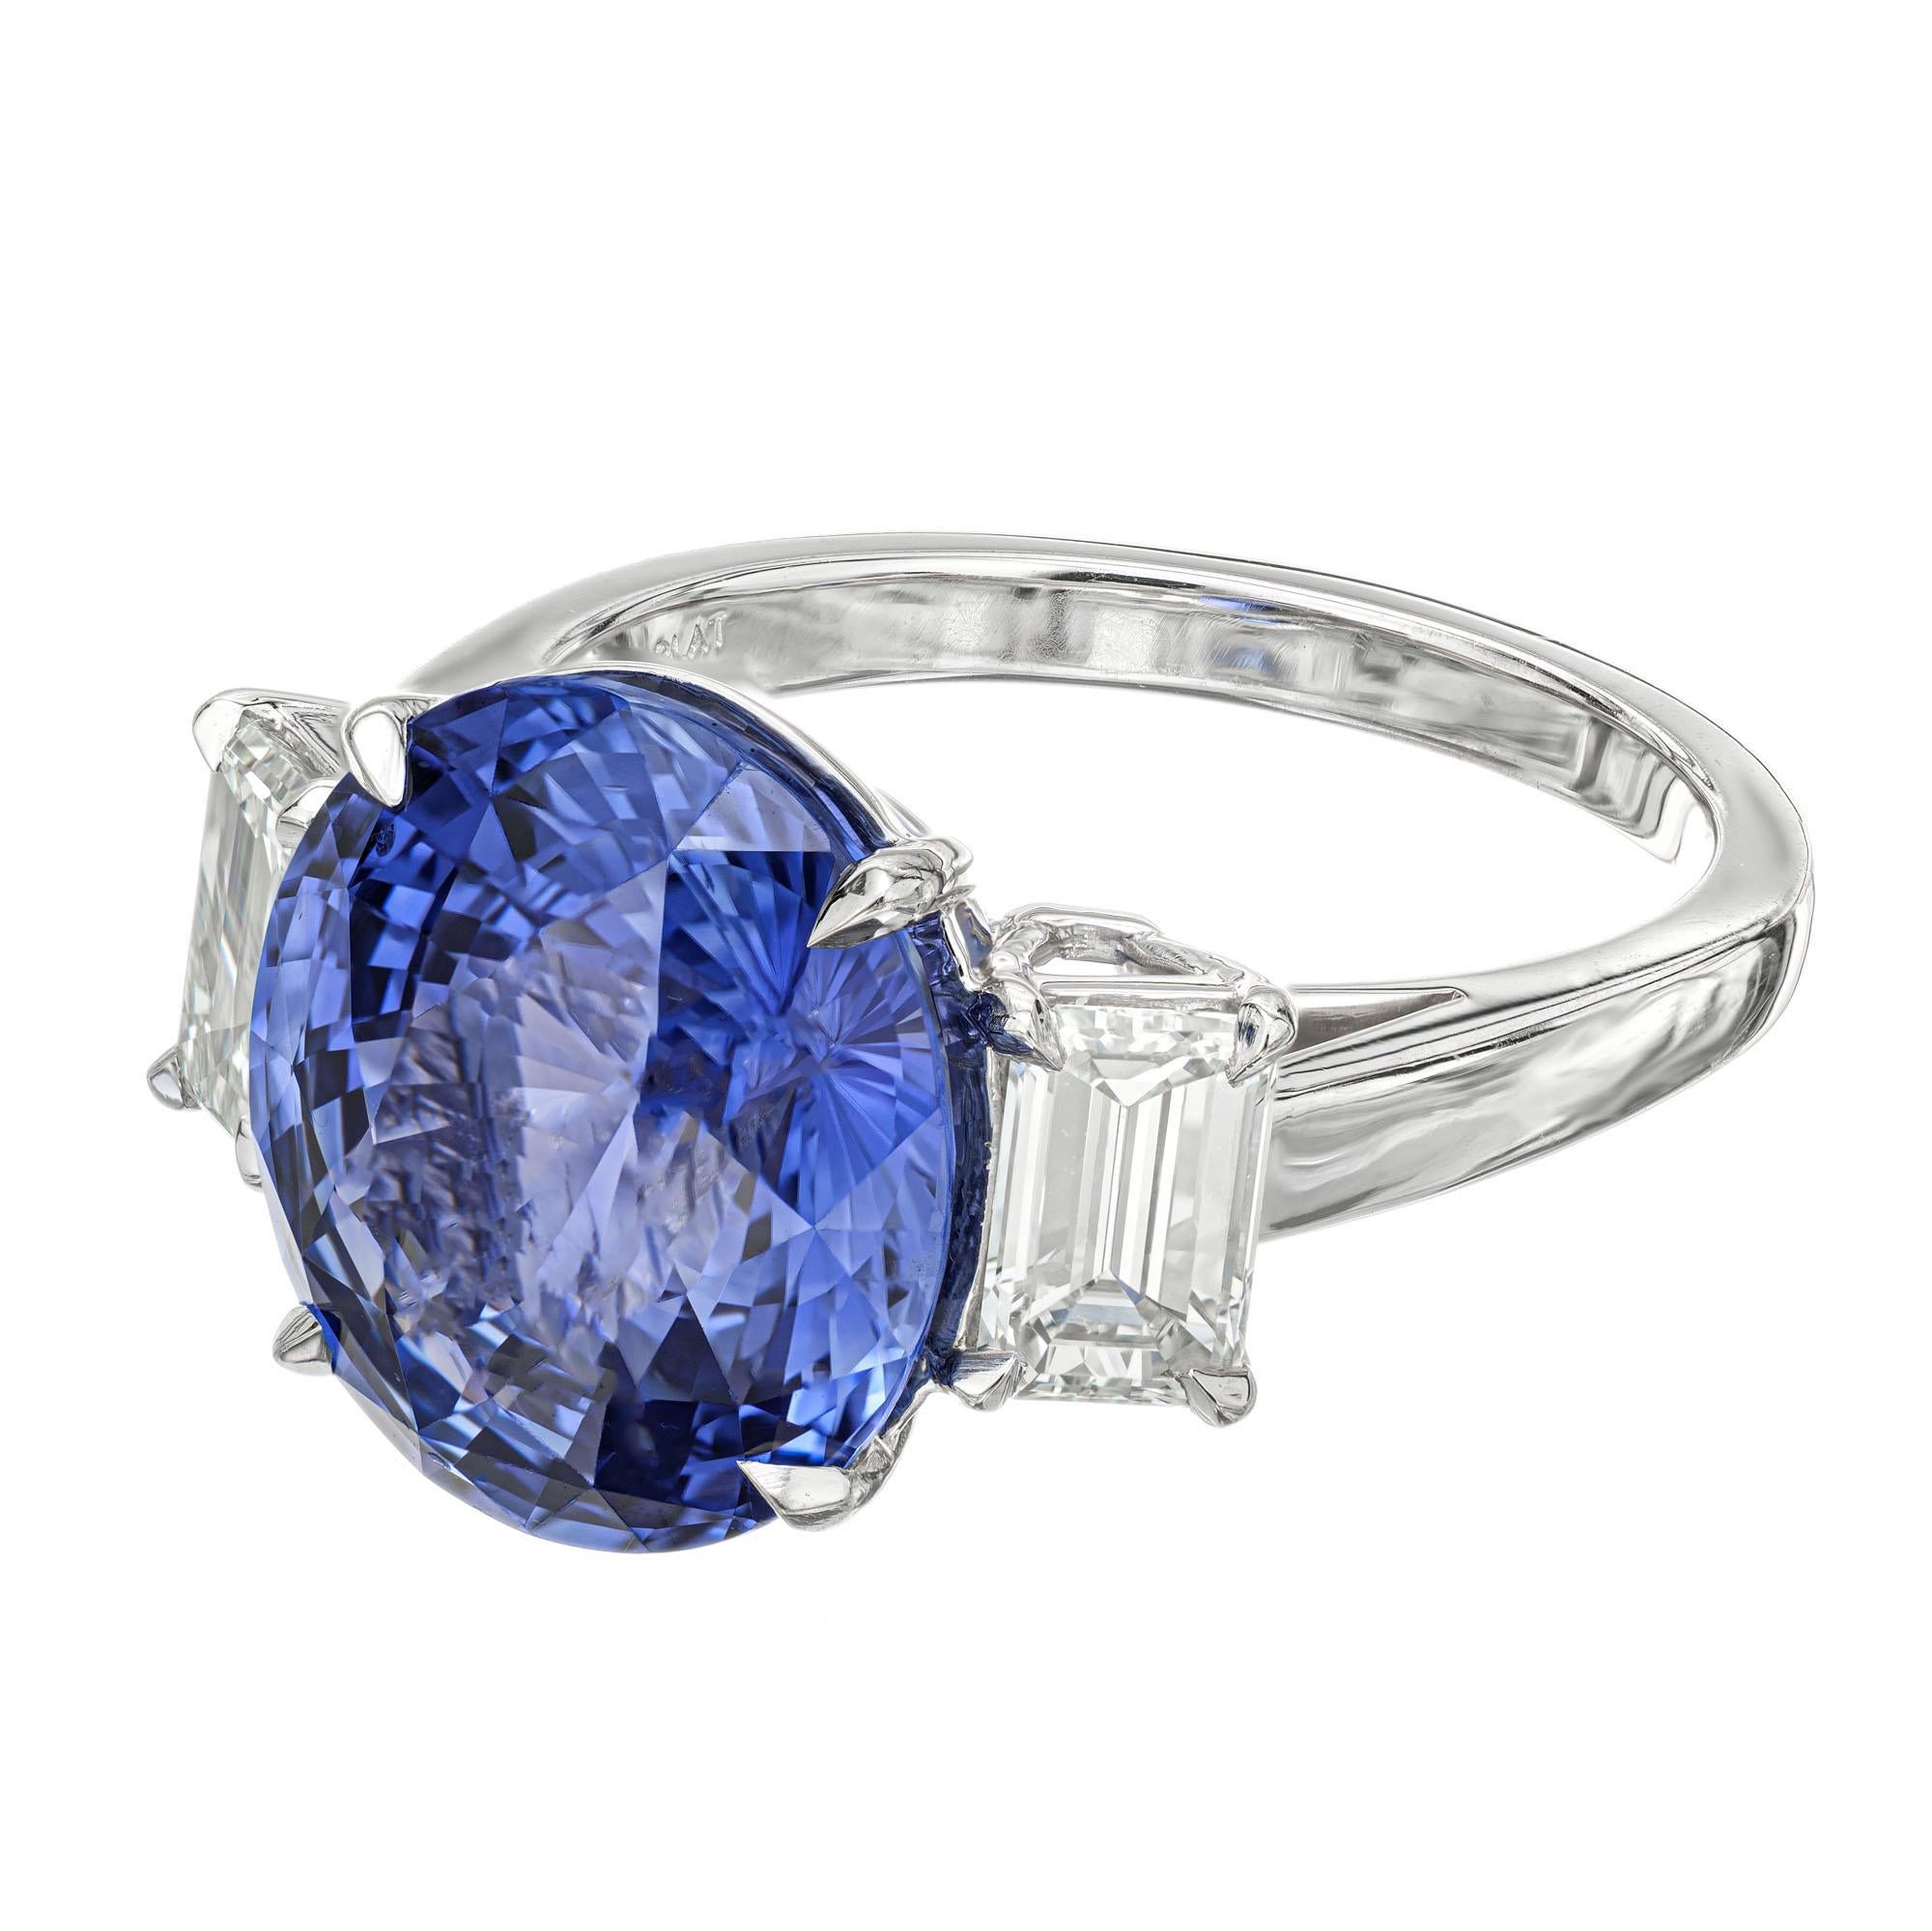 Sapphire and diamond three-stone engagement ring. GIA certified 8.16 carat oval sapphire in a platinum setting with 2 emerald cut side diamonds totaling 1.09cts. Designed and crafted in the Peter Suchy Workshop.

1 oval bright blue sapphire, VS